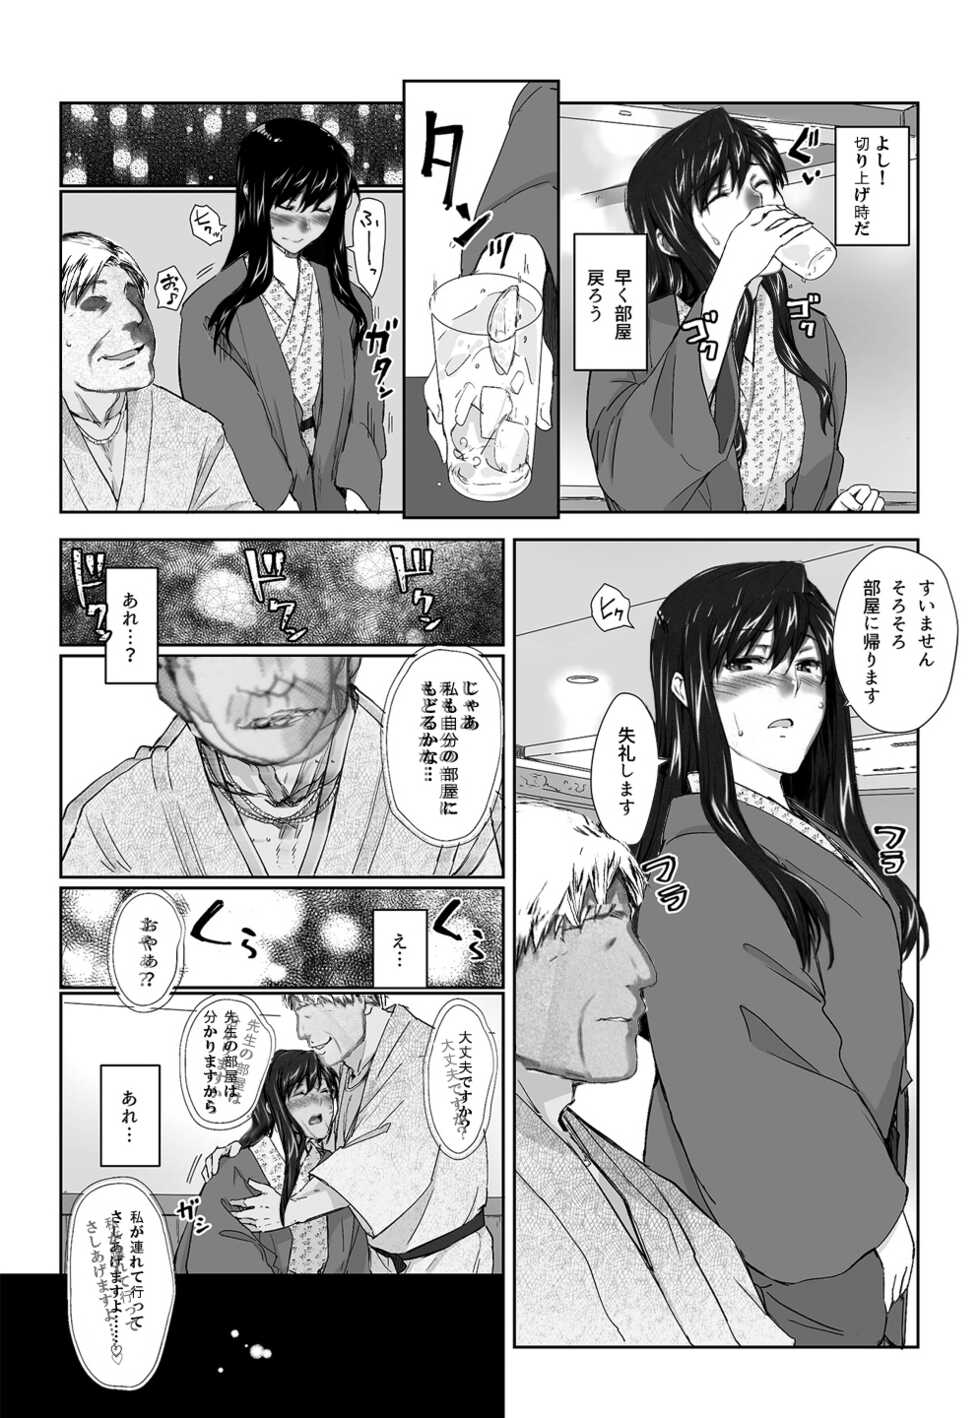 Sakiko-san in delusion Vol.8 ~Sakiko-san's circumstance at an educational training Route3~ (collage) (Continue to “First day of study trip” (page 42) of Vol.1) - Page 5